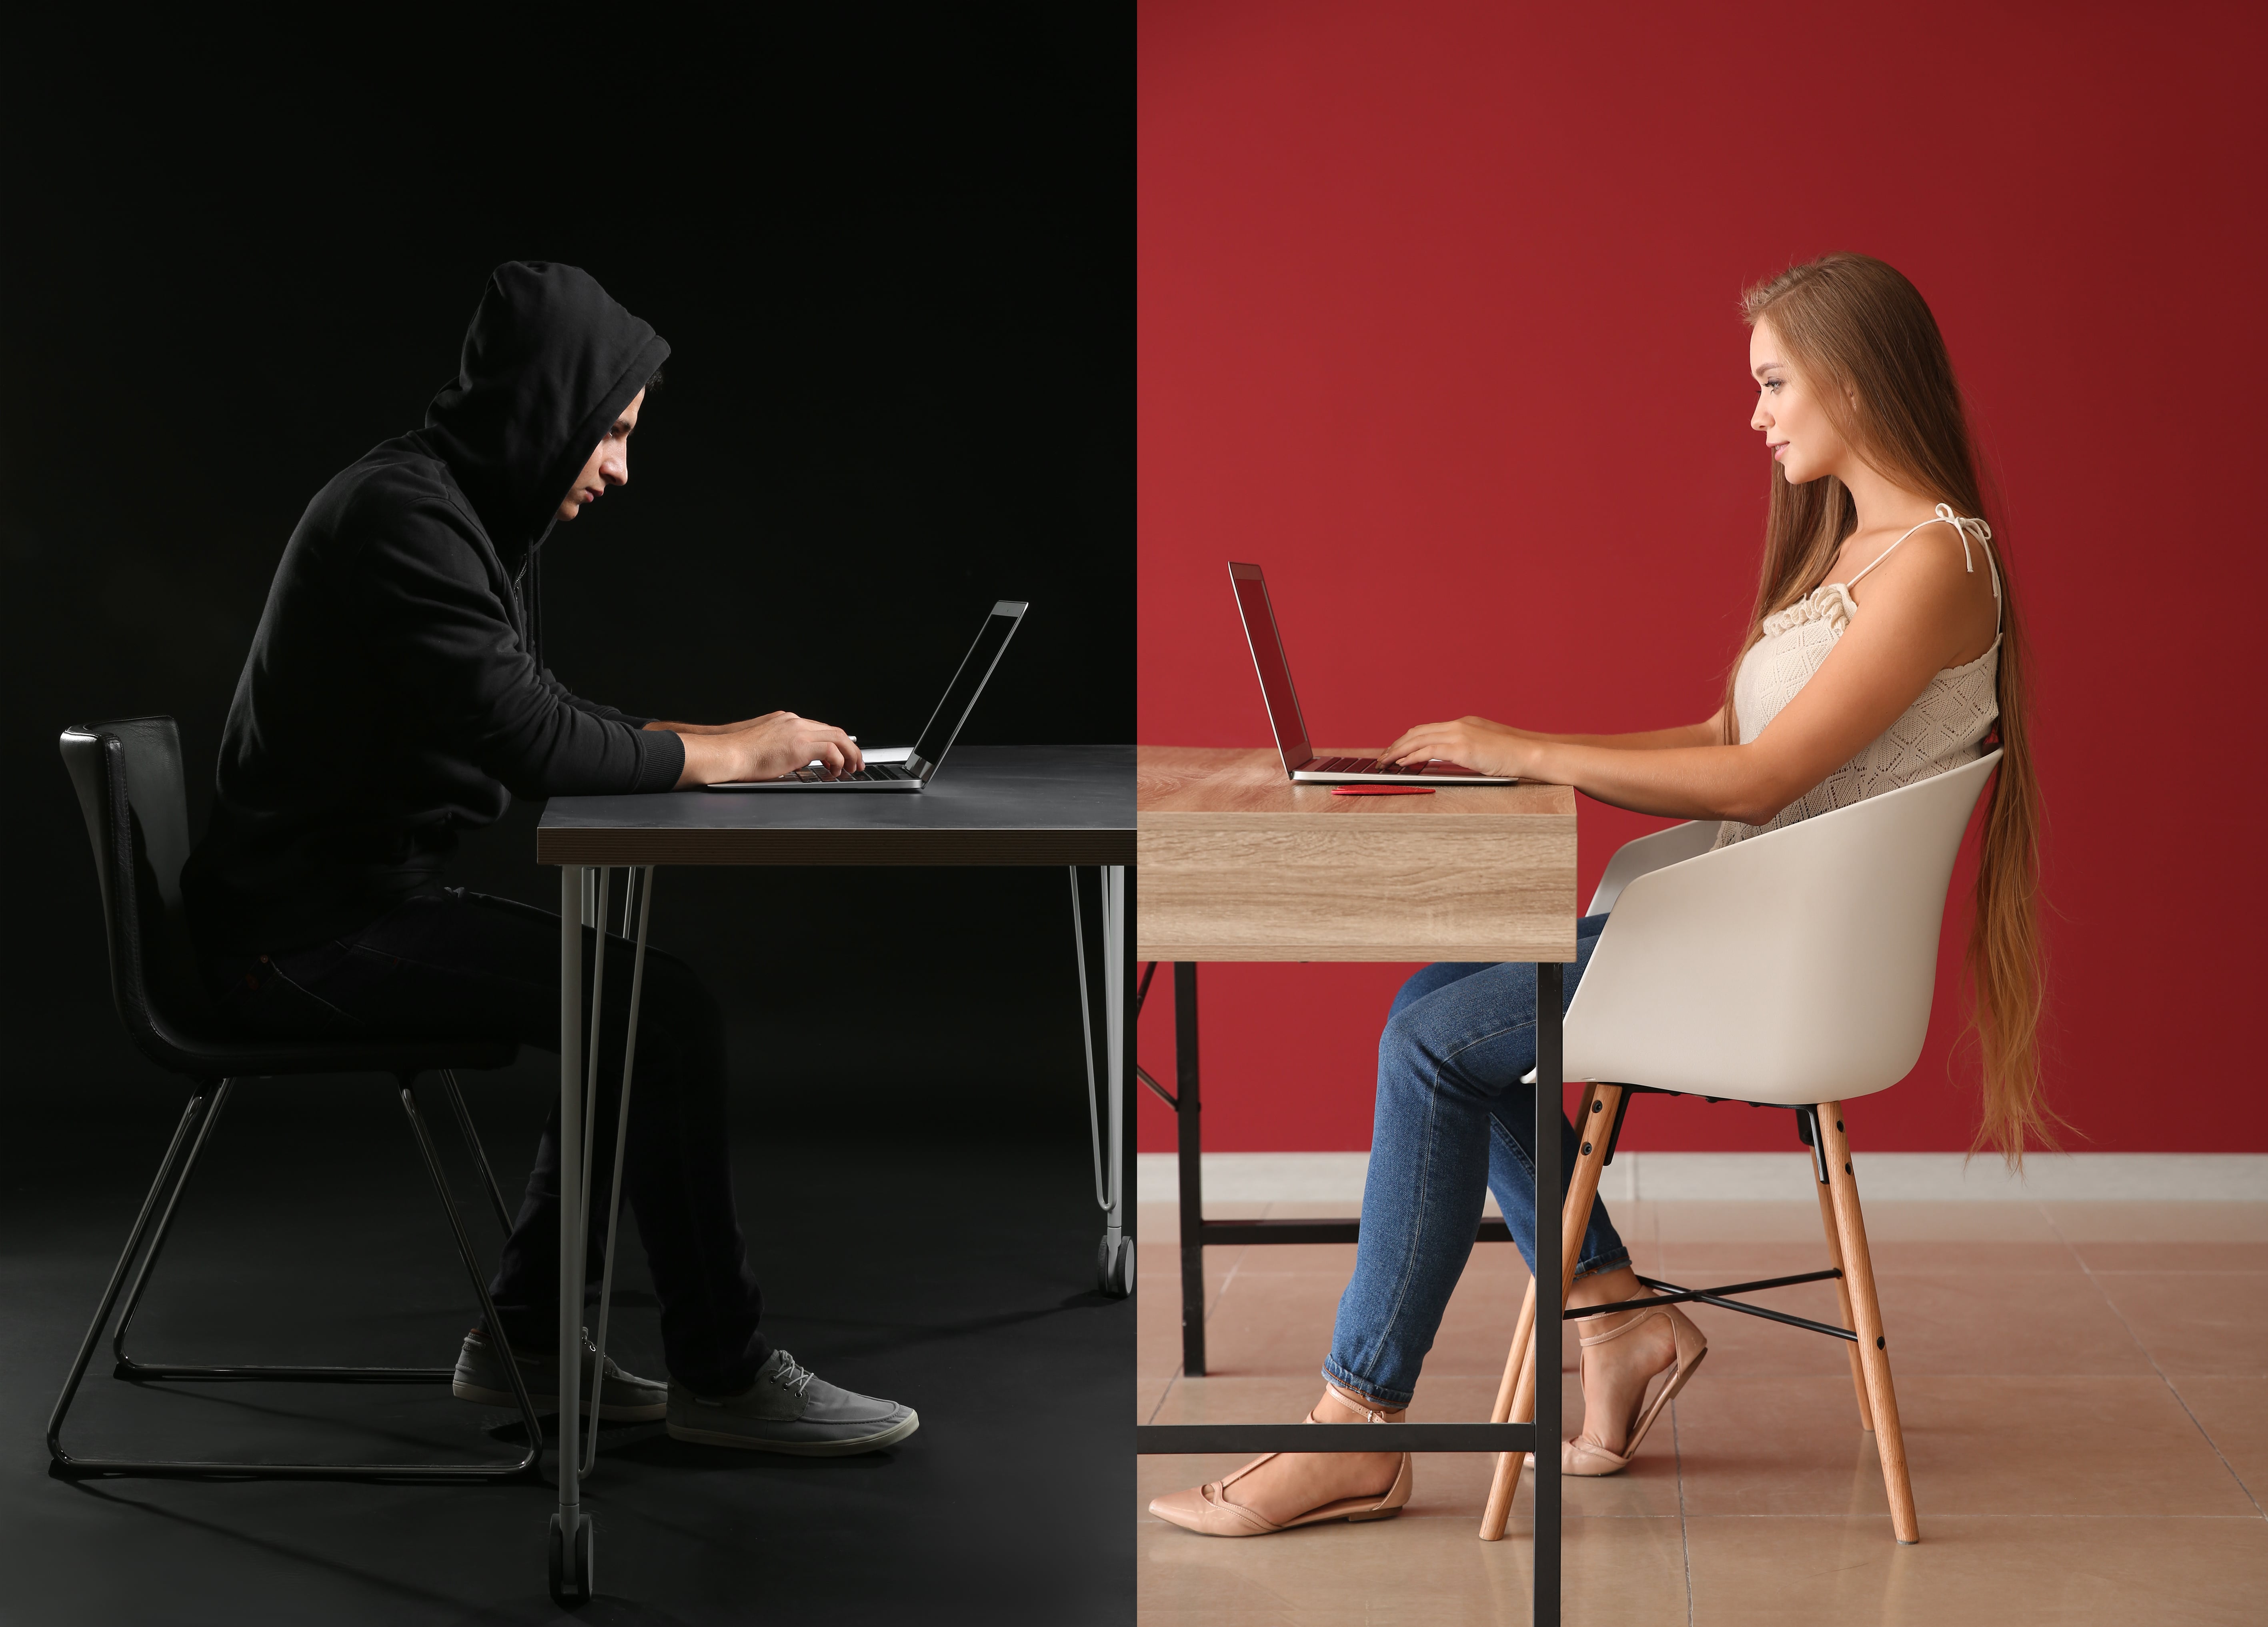 man in all black on computer girl on computer on other side